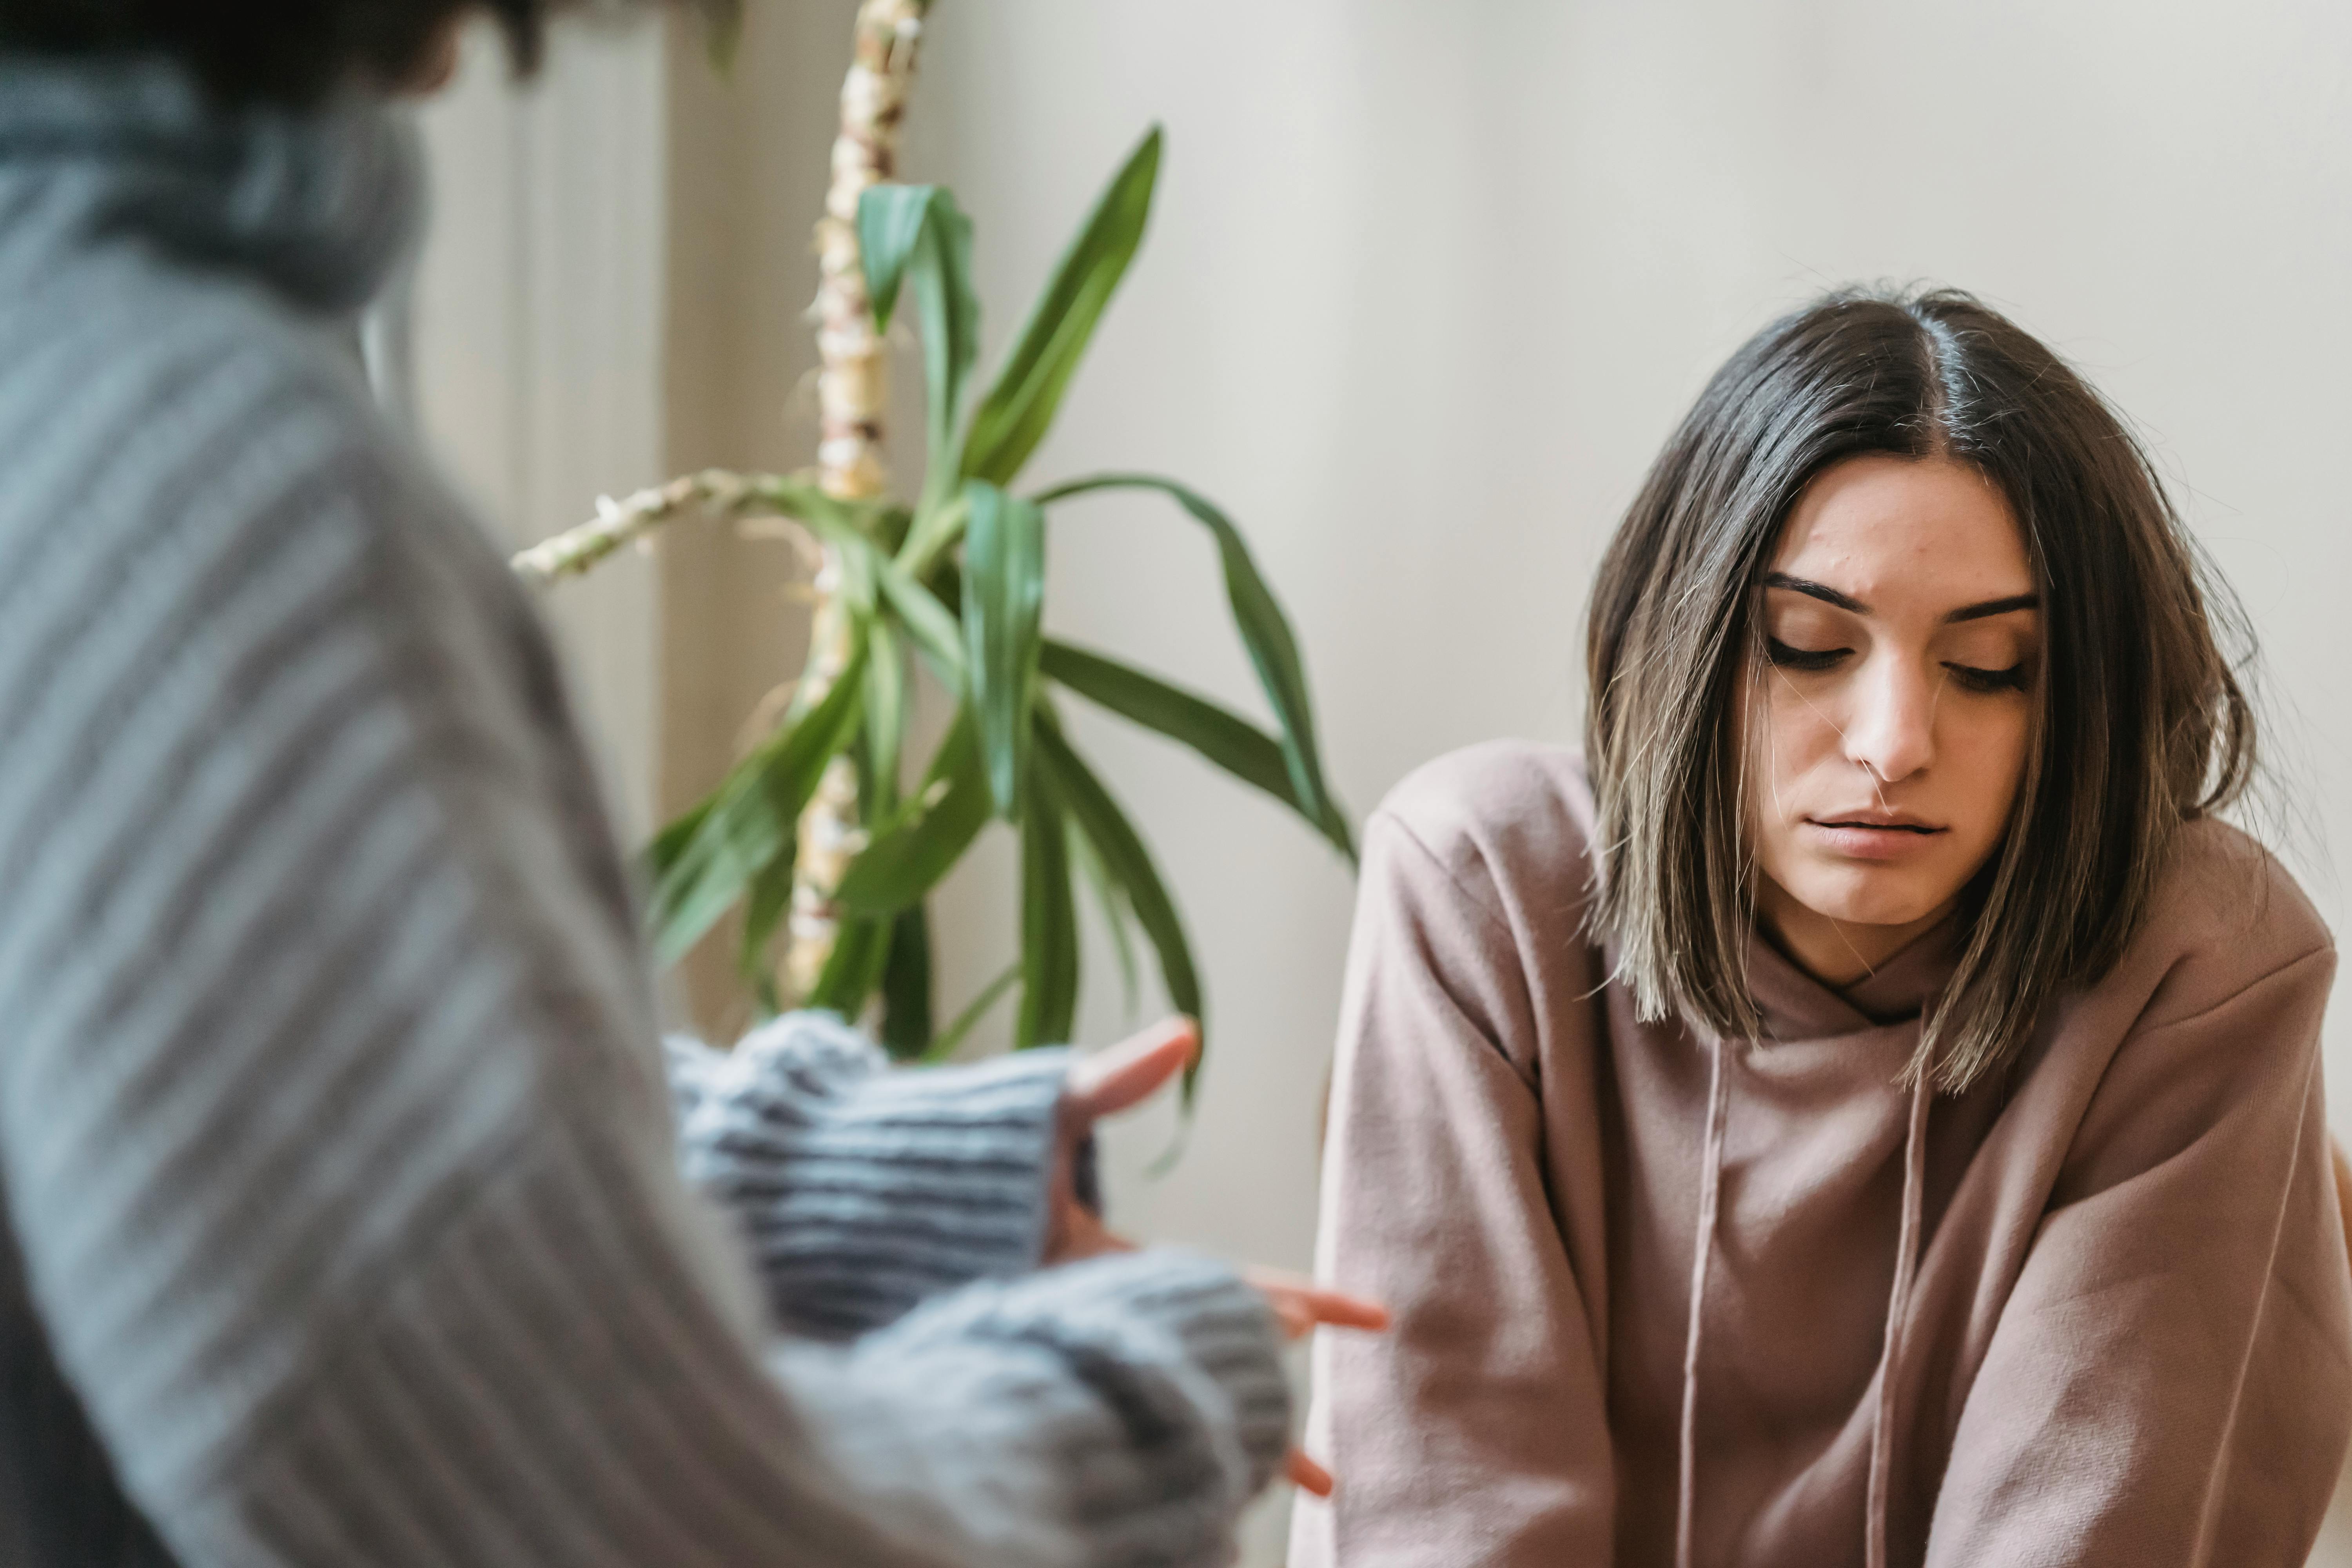 A woman looks away from another during a conversation. This represents how to deal with conflict anxiety and how it can make us withdrawn instead of speaking up. 